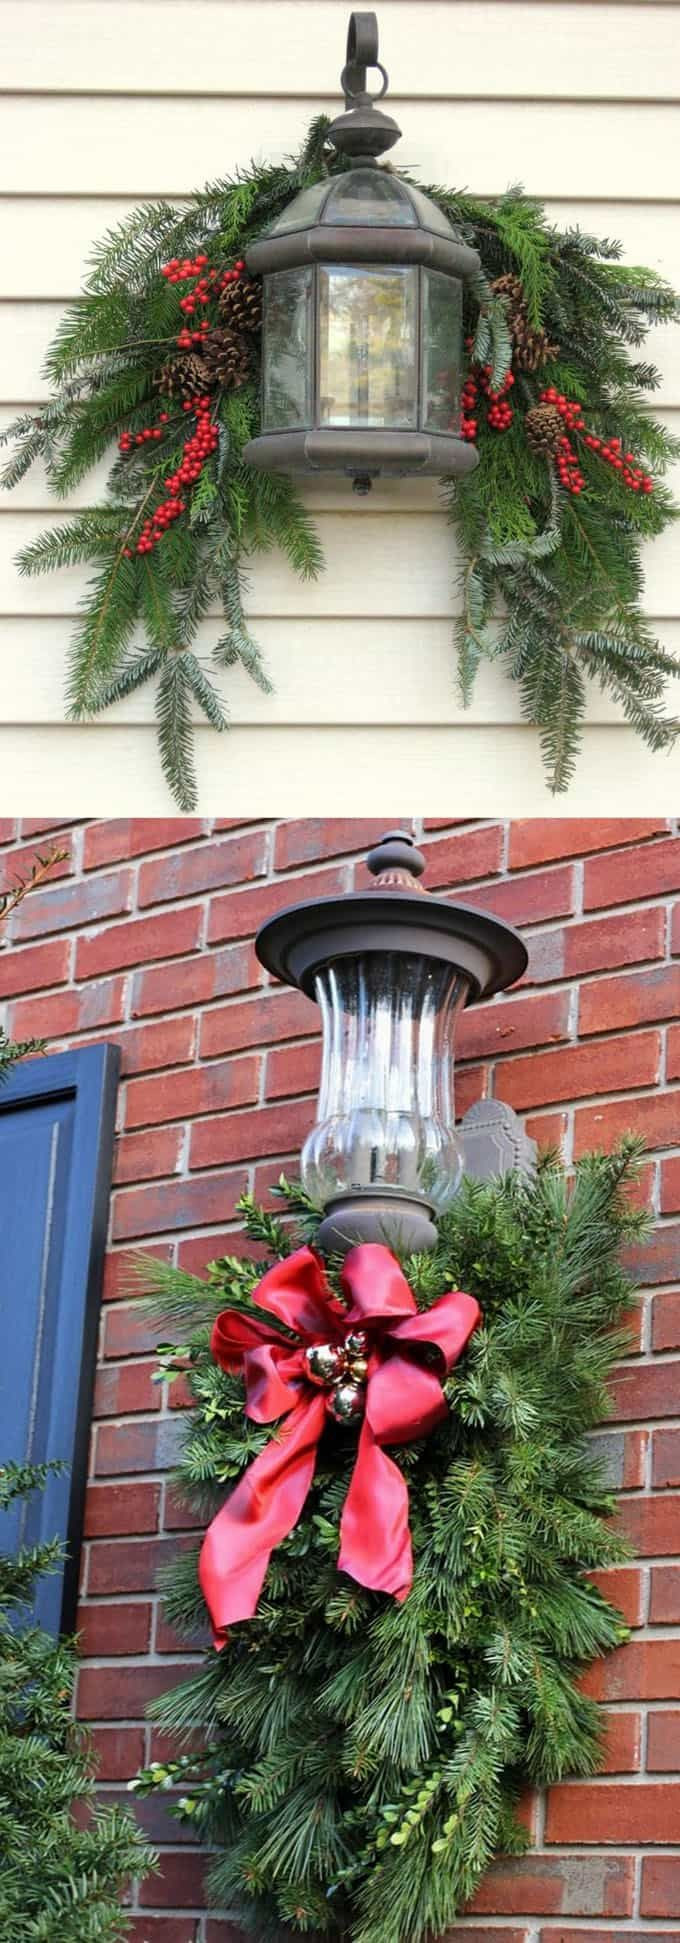 Outdoor Christmas Swags
 Best 25 Christmas swags ideas on Pinterest